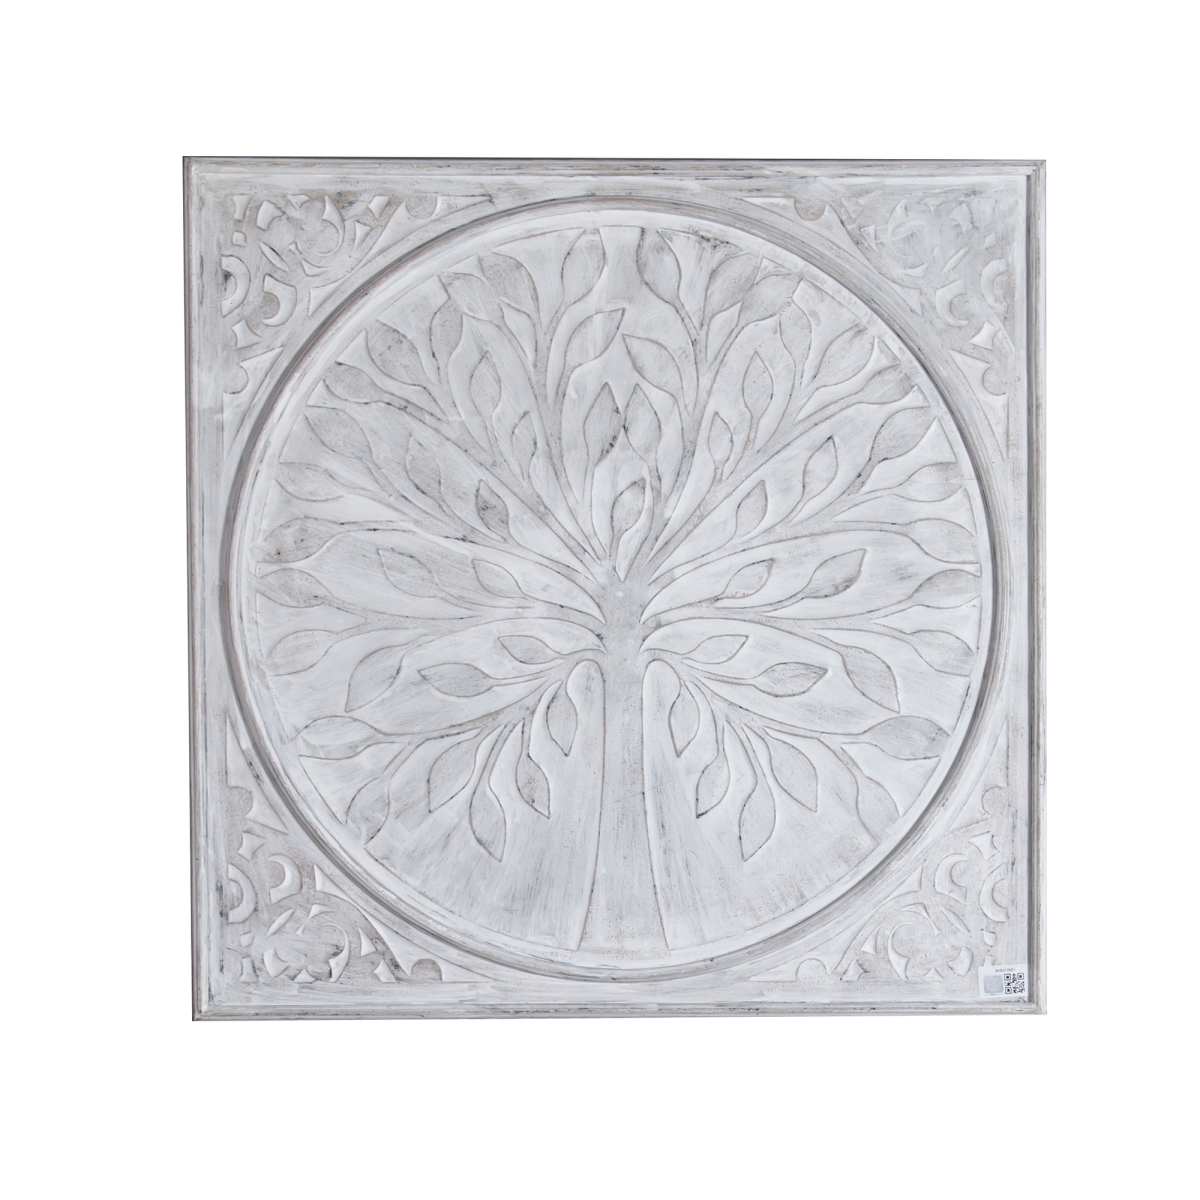 Luxen Home Wha538 31.5 In. Tree Inlay Square Metal Wall Panel